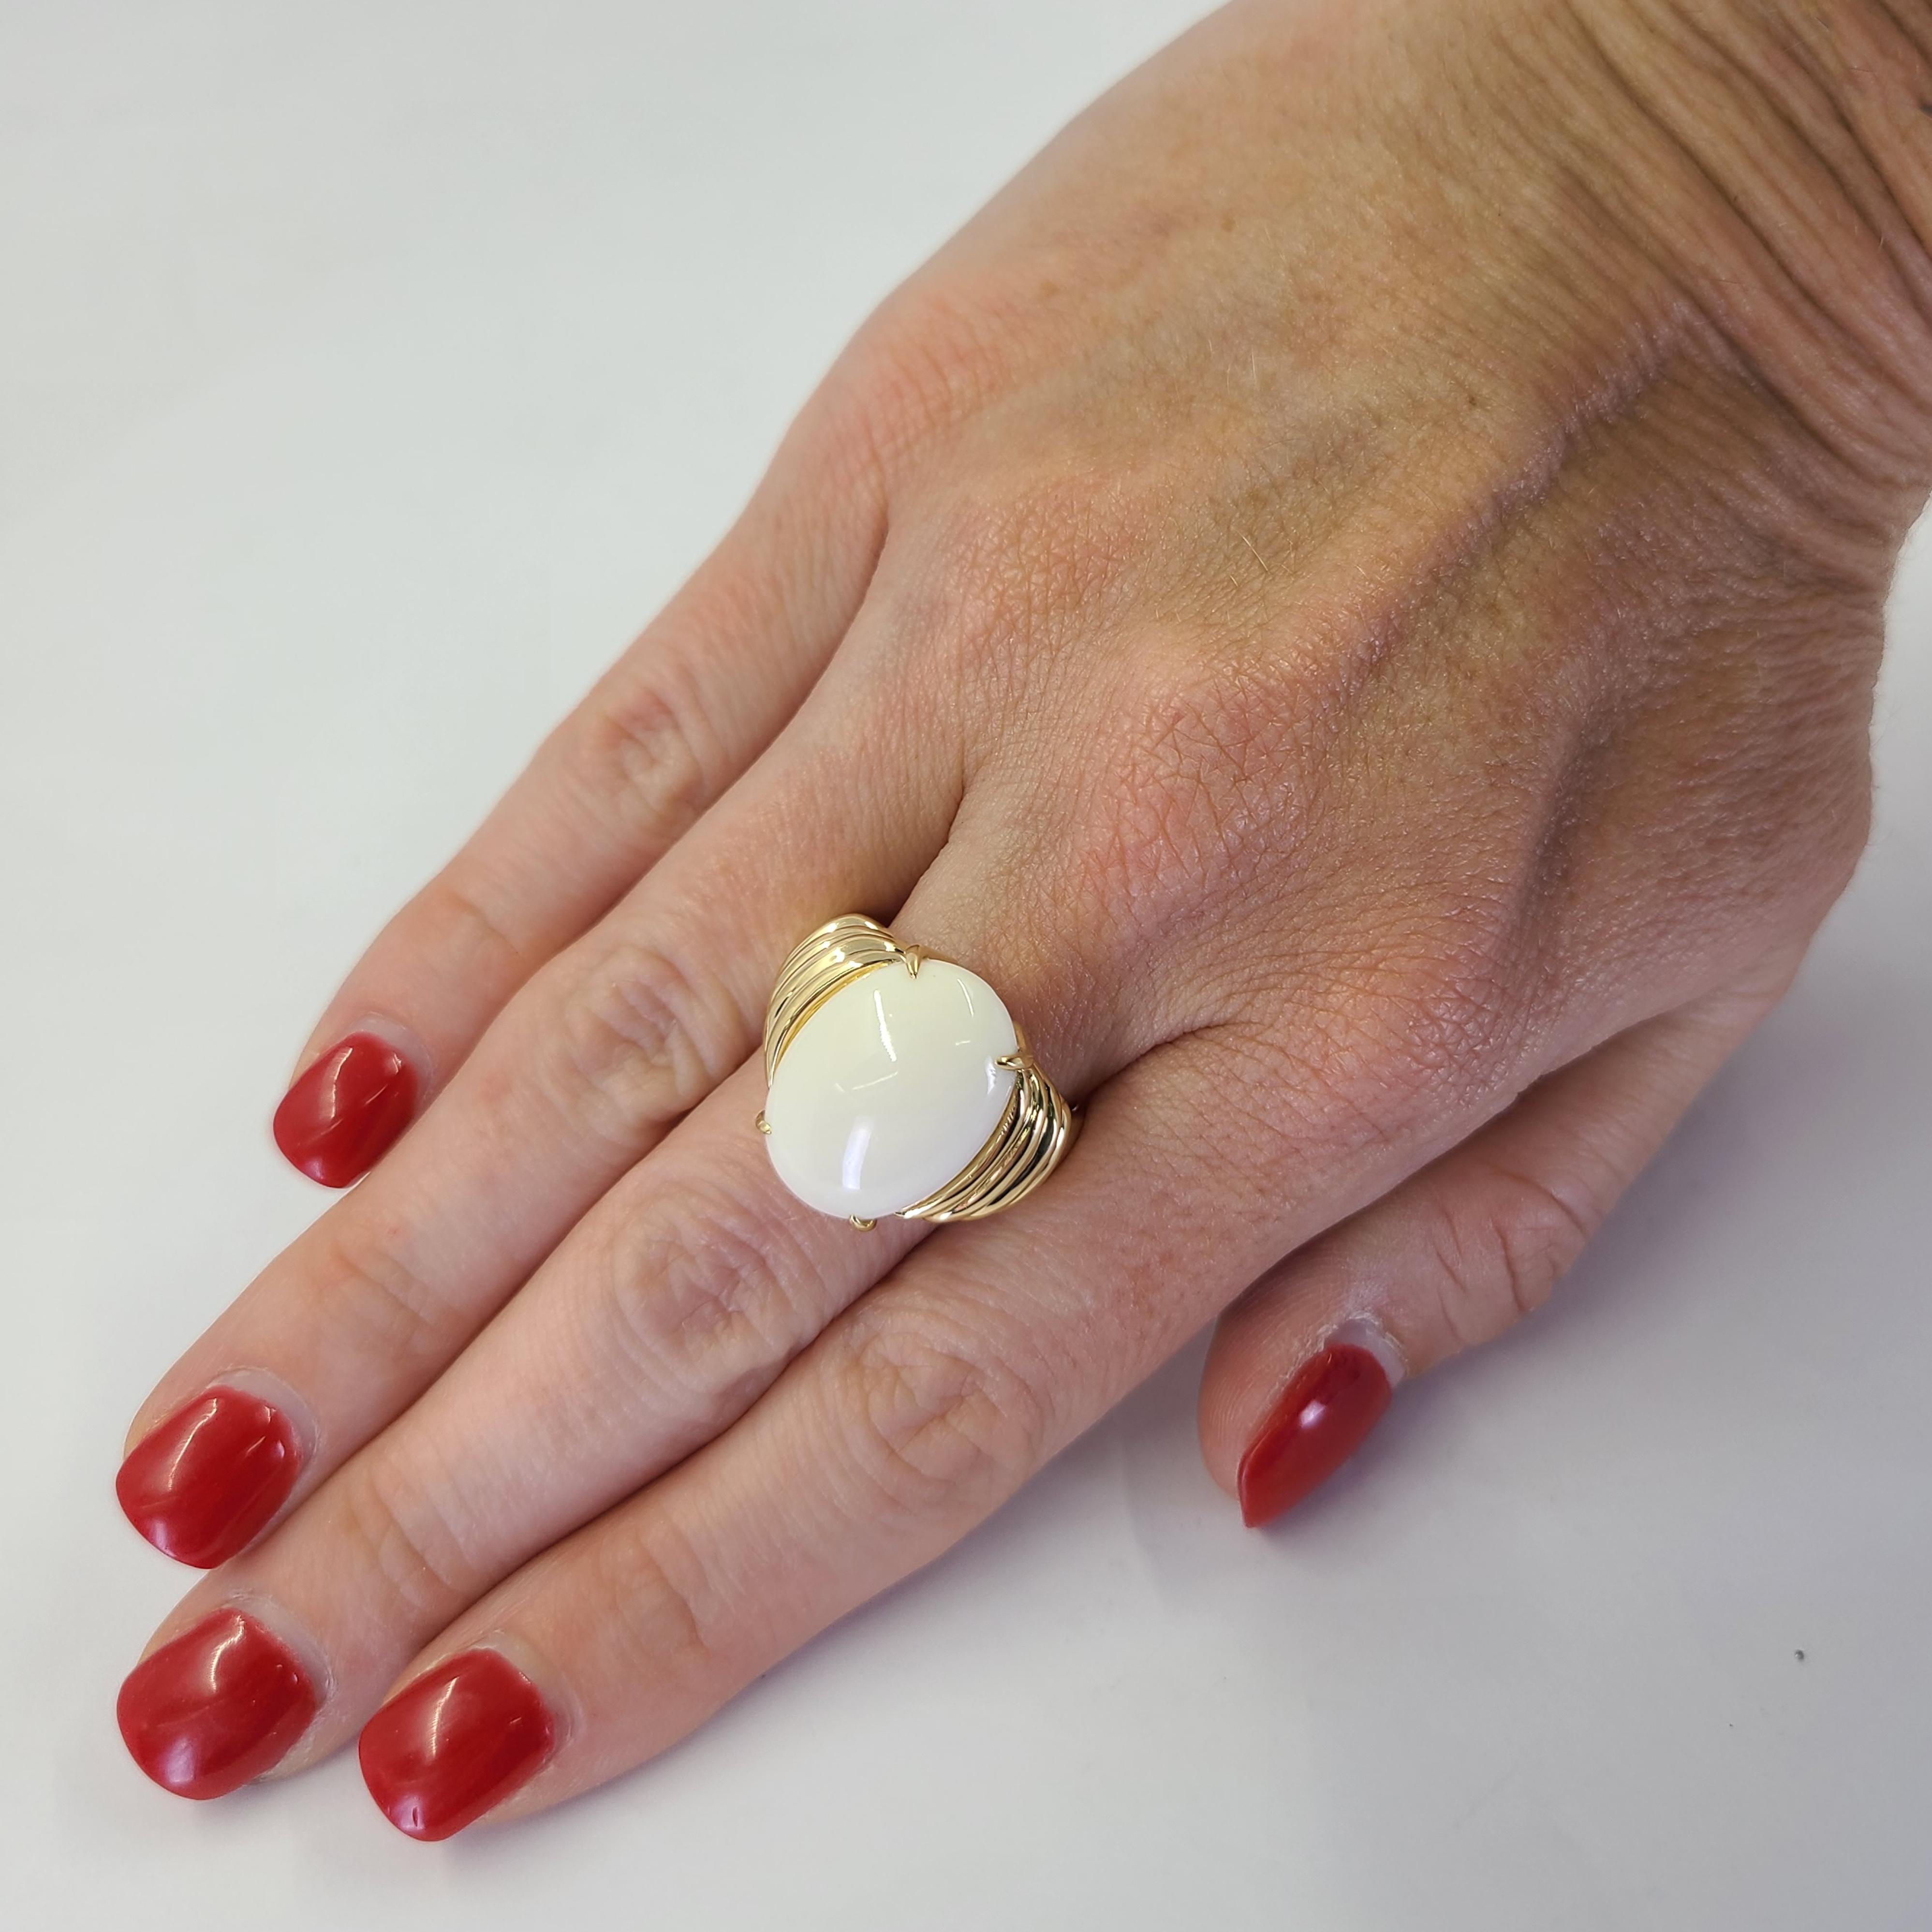 Gump's 18 Karat Yellow Gold Ring Featuring An 18mm x 13mm Oval Cabochon White Coral. Finger Size 7.5; One Sizing Service Included With Purchase. Finished Weight Is 12.7 Grams.